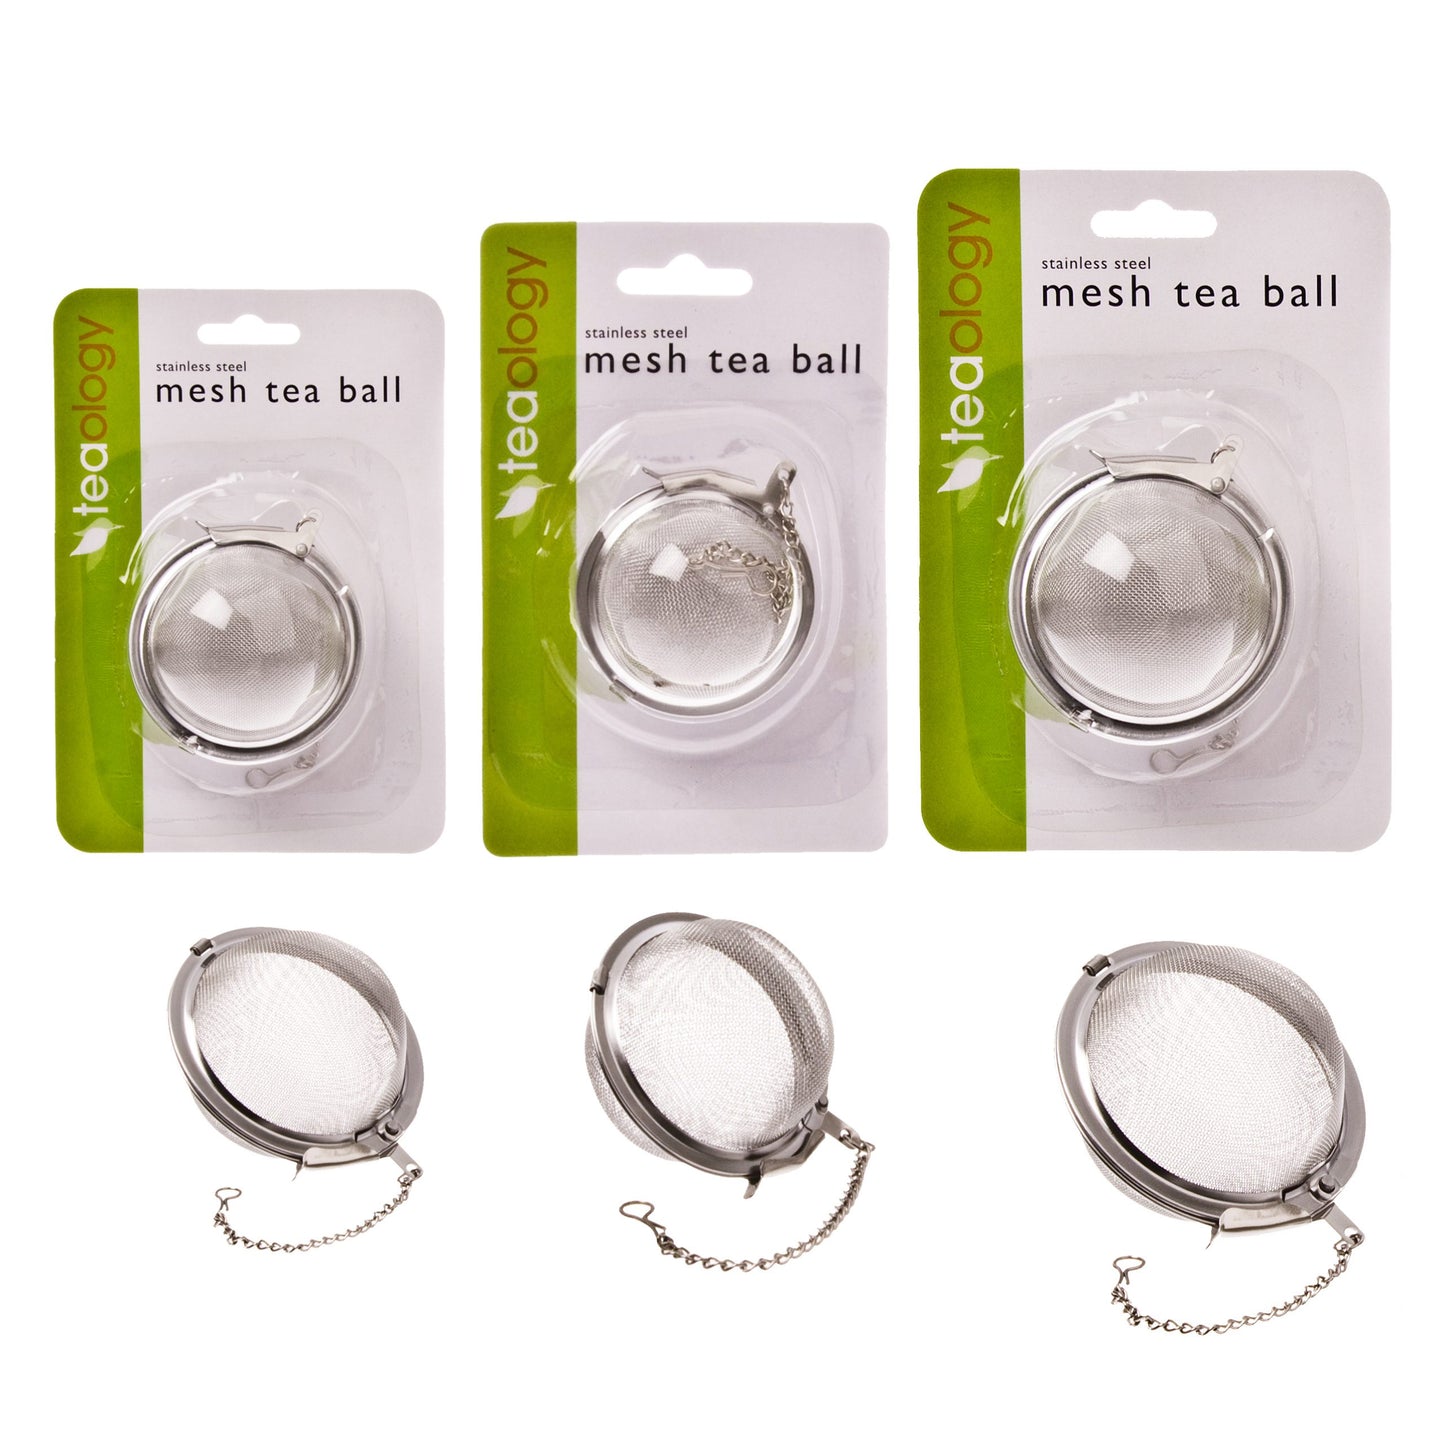 Teaology Tea Ball – Stainless Steel Mesh 4.5cm to 6.5cm